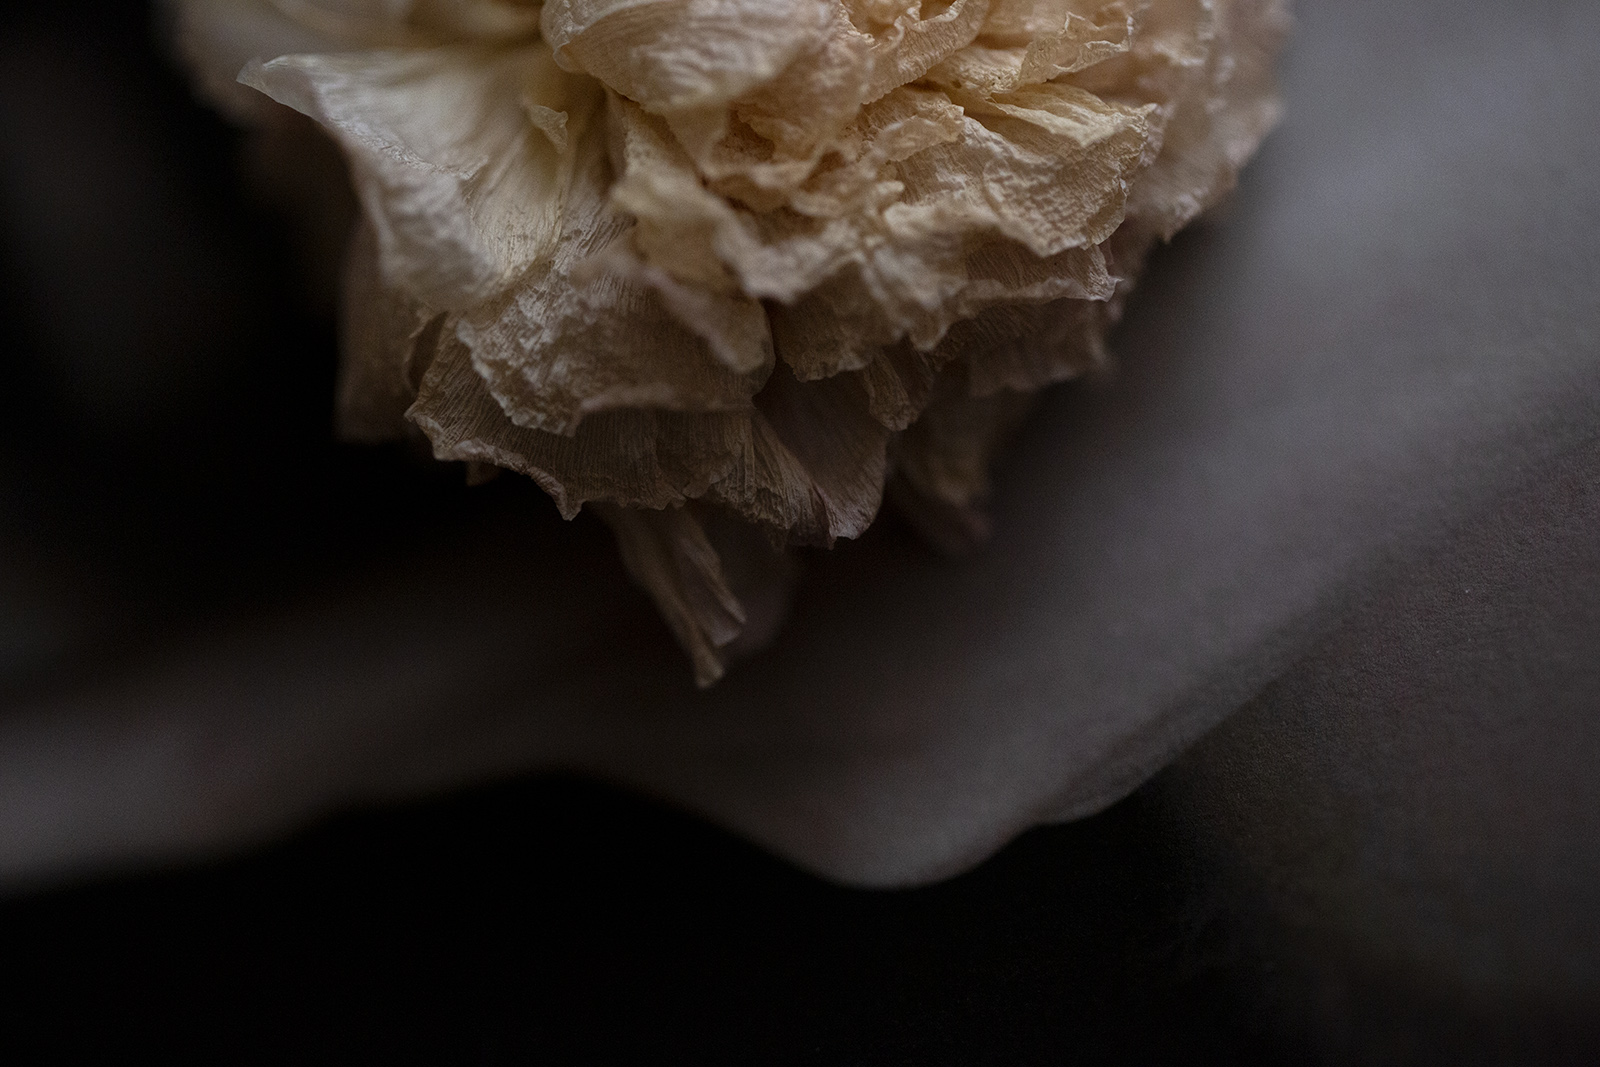 a picture of a dried rose flower shot by Namiko Kitaura